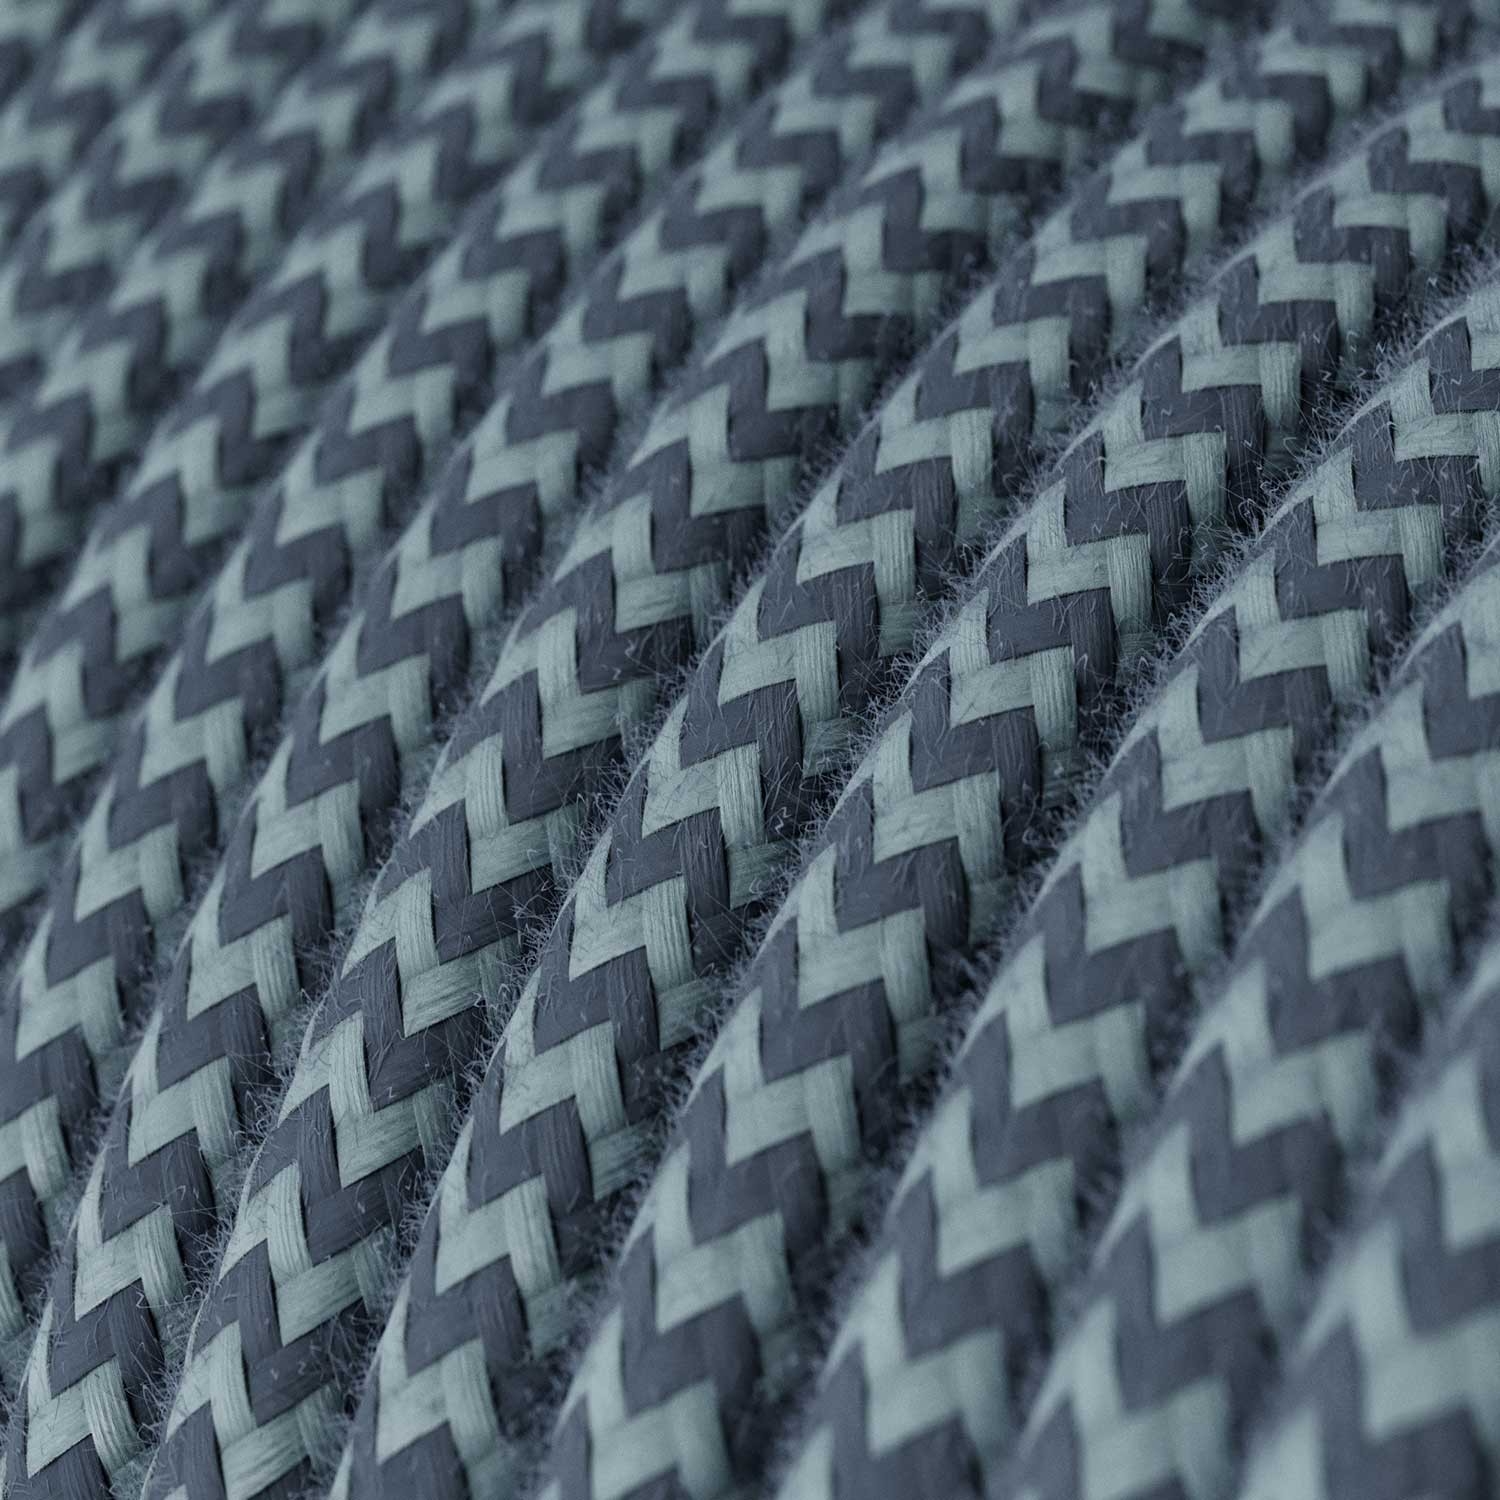 RZ25 ZigZag Stone Grey & Ocean Round Cotton Electrical Fabric Cloth Cord Cable